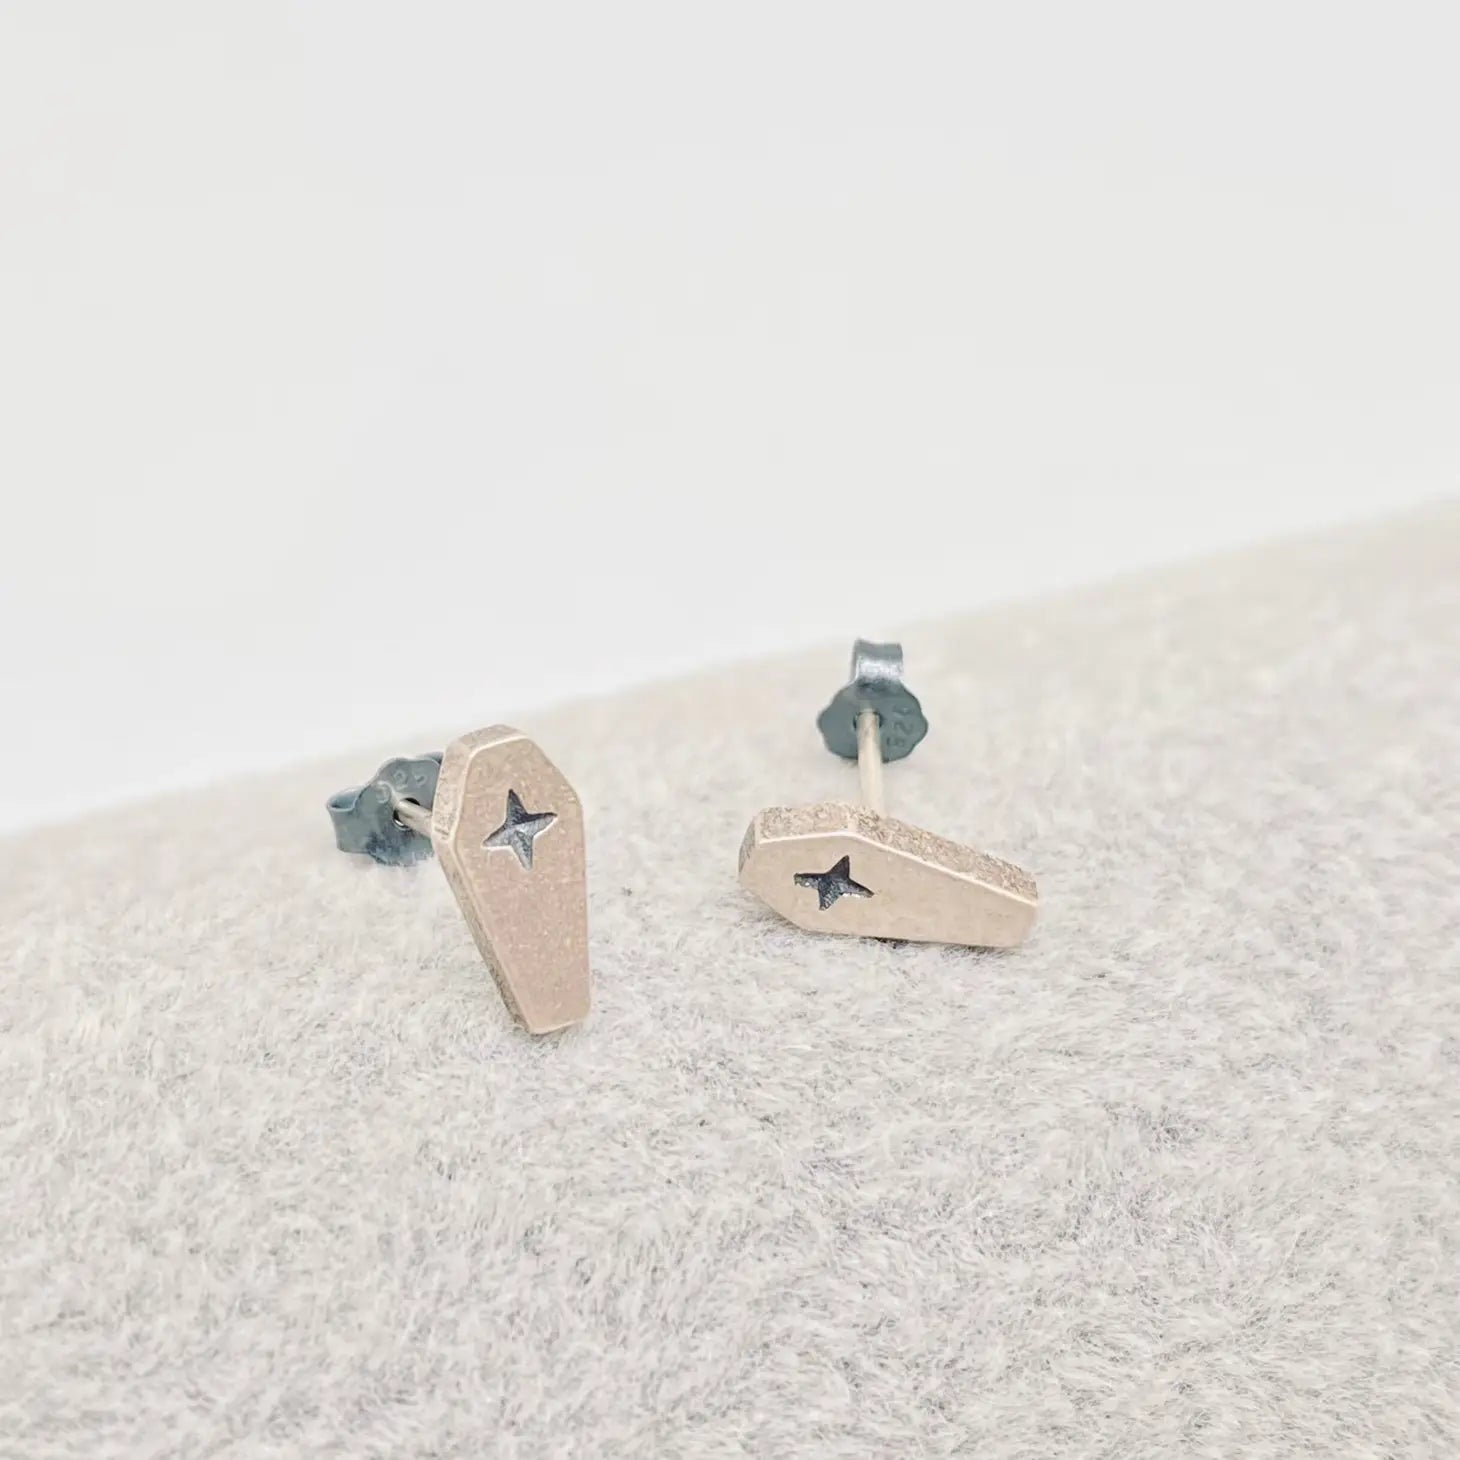 shiny burnished sterling silver coffin shaped post earrings with cross detail. Shown from the front